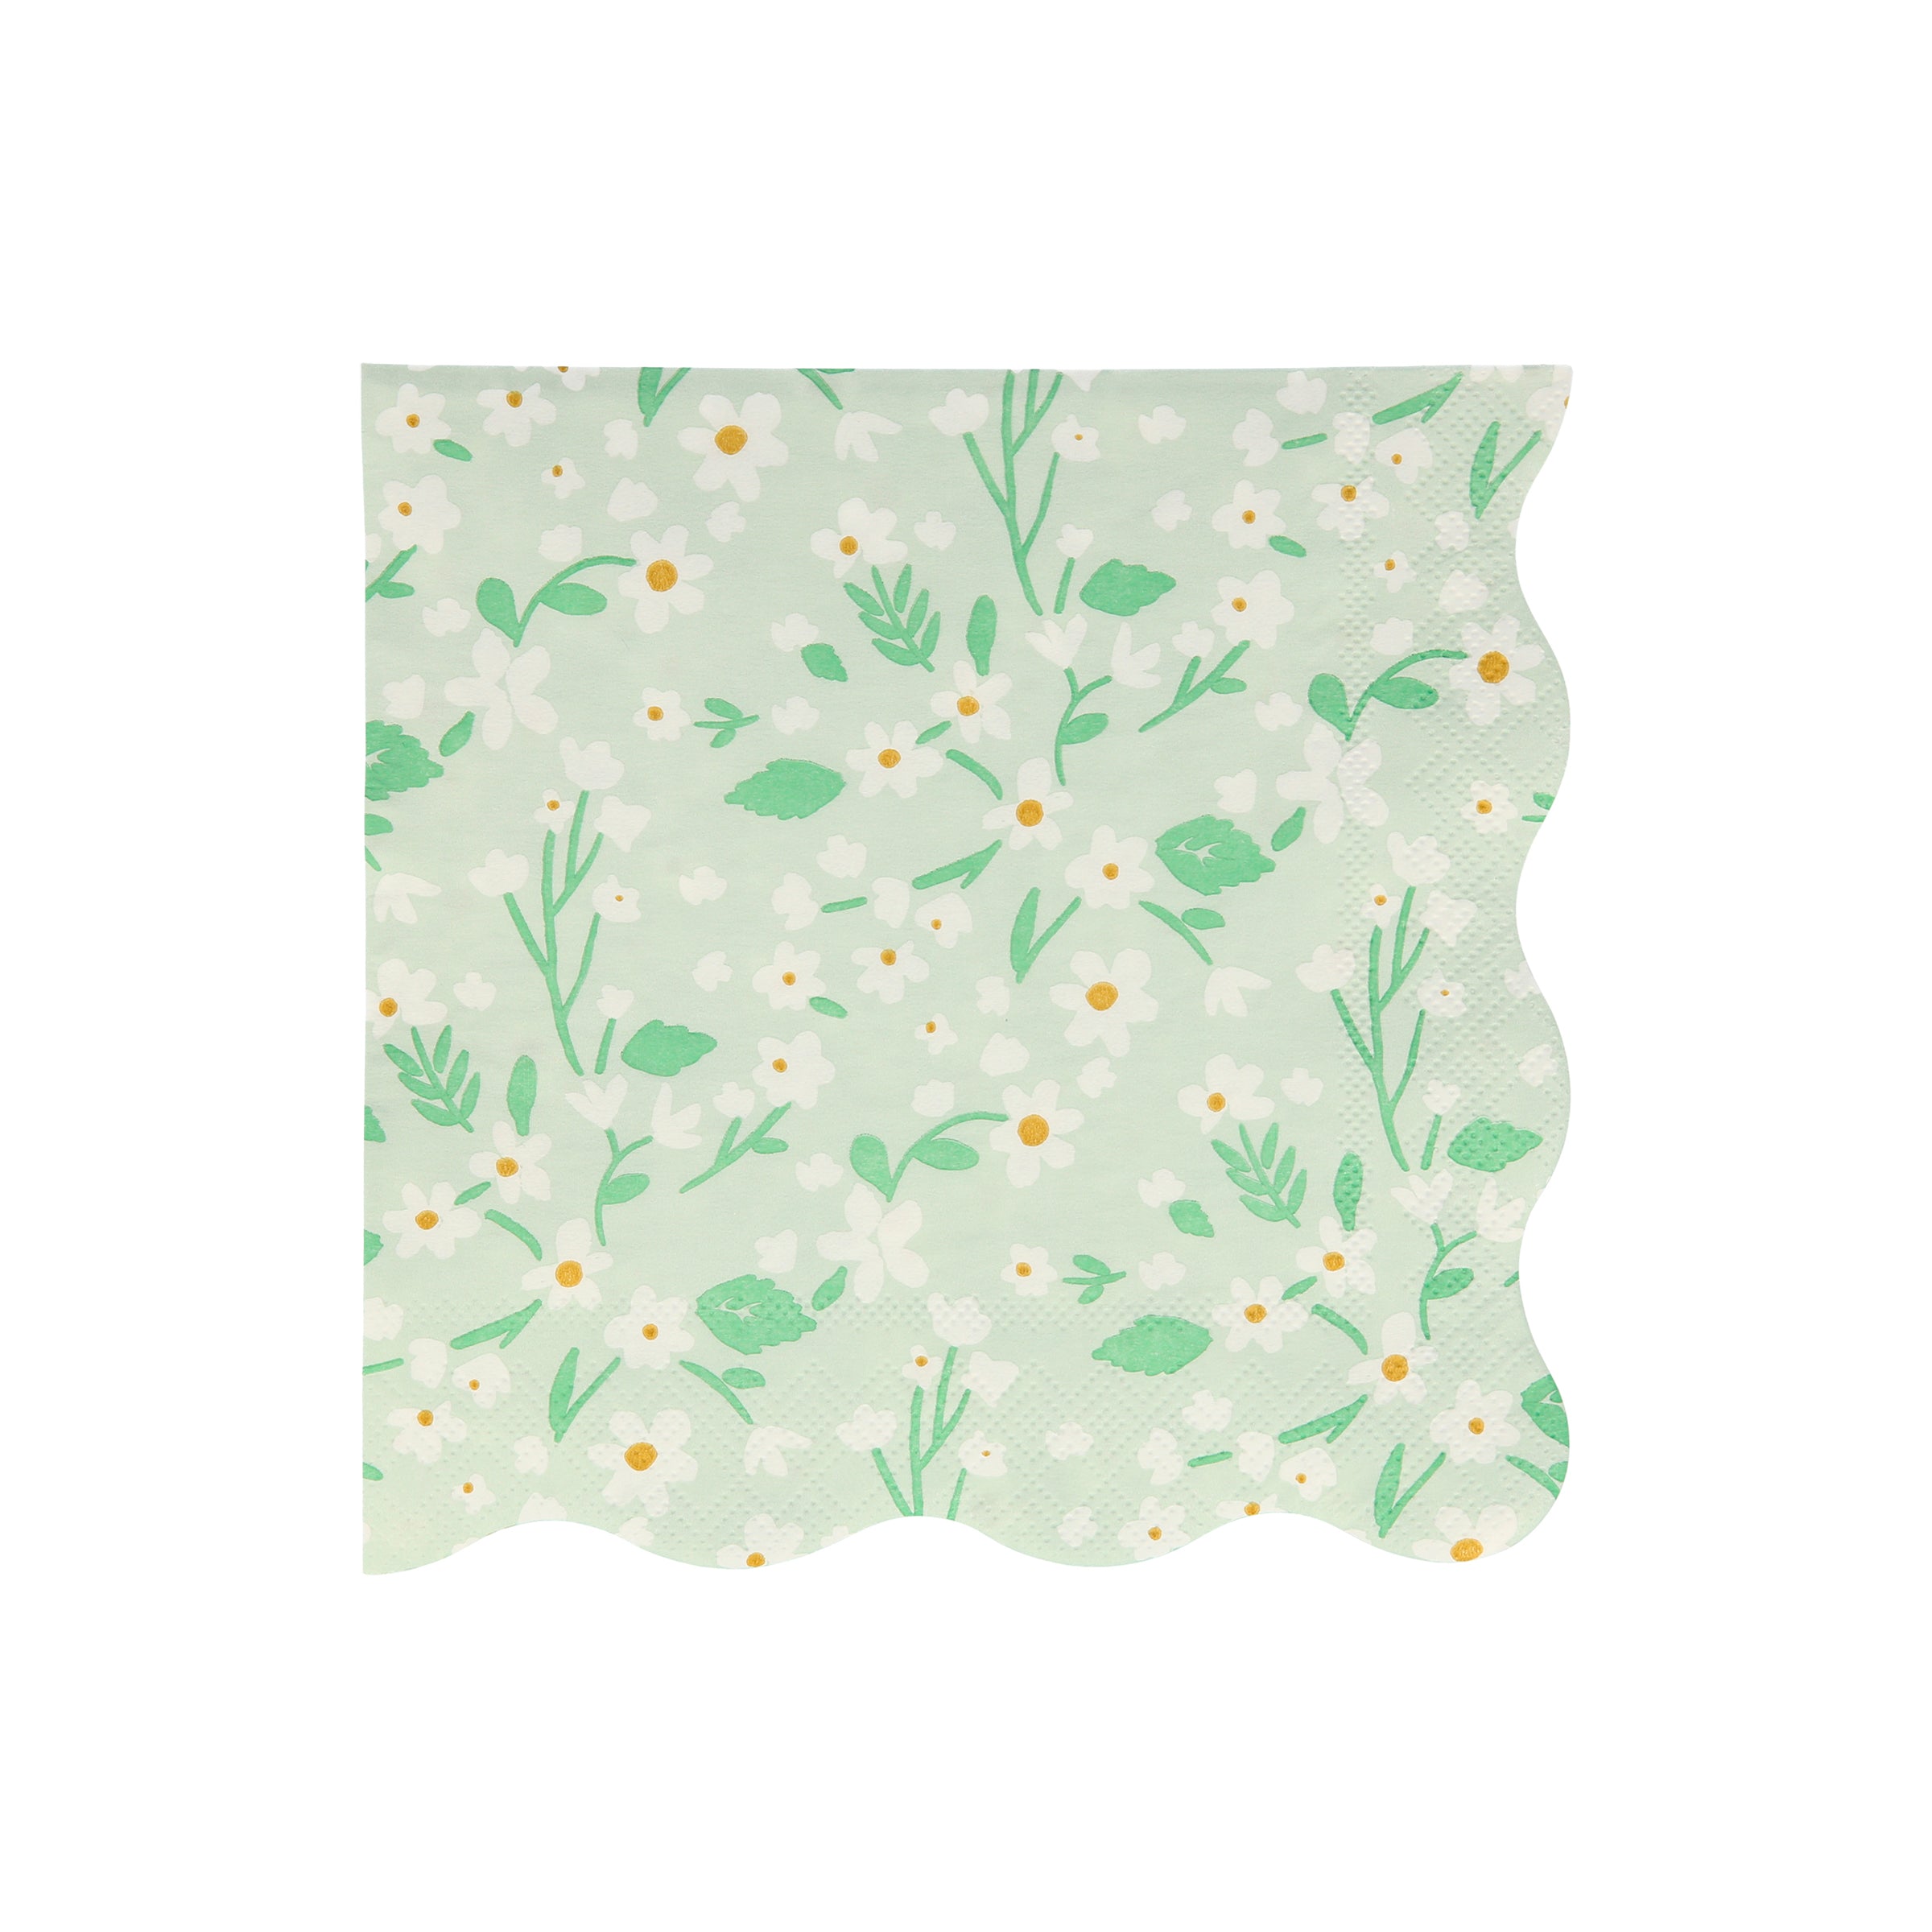 Our paper napkins have a pretty ditsy floral design with scalloped edge.